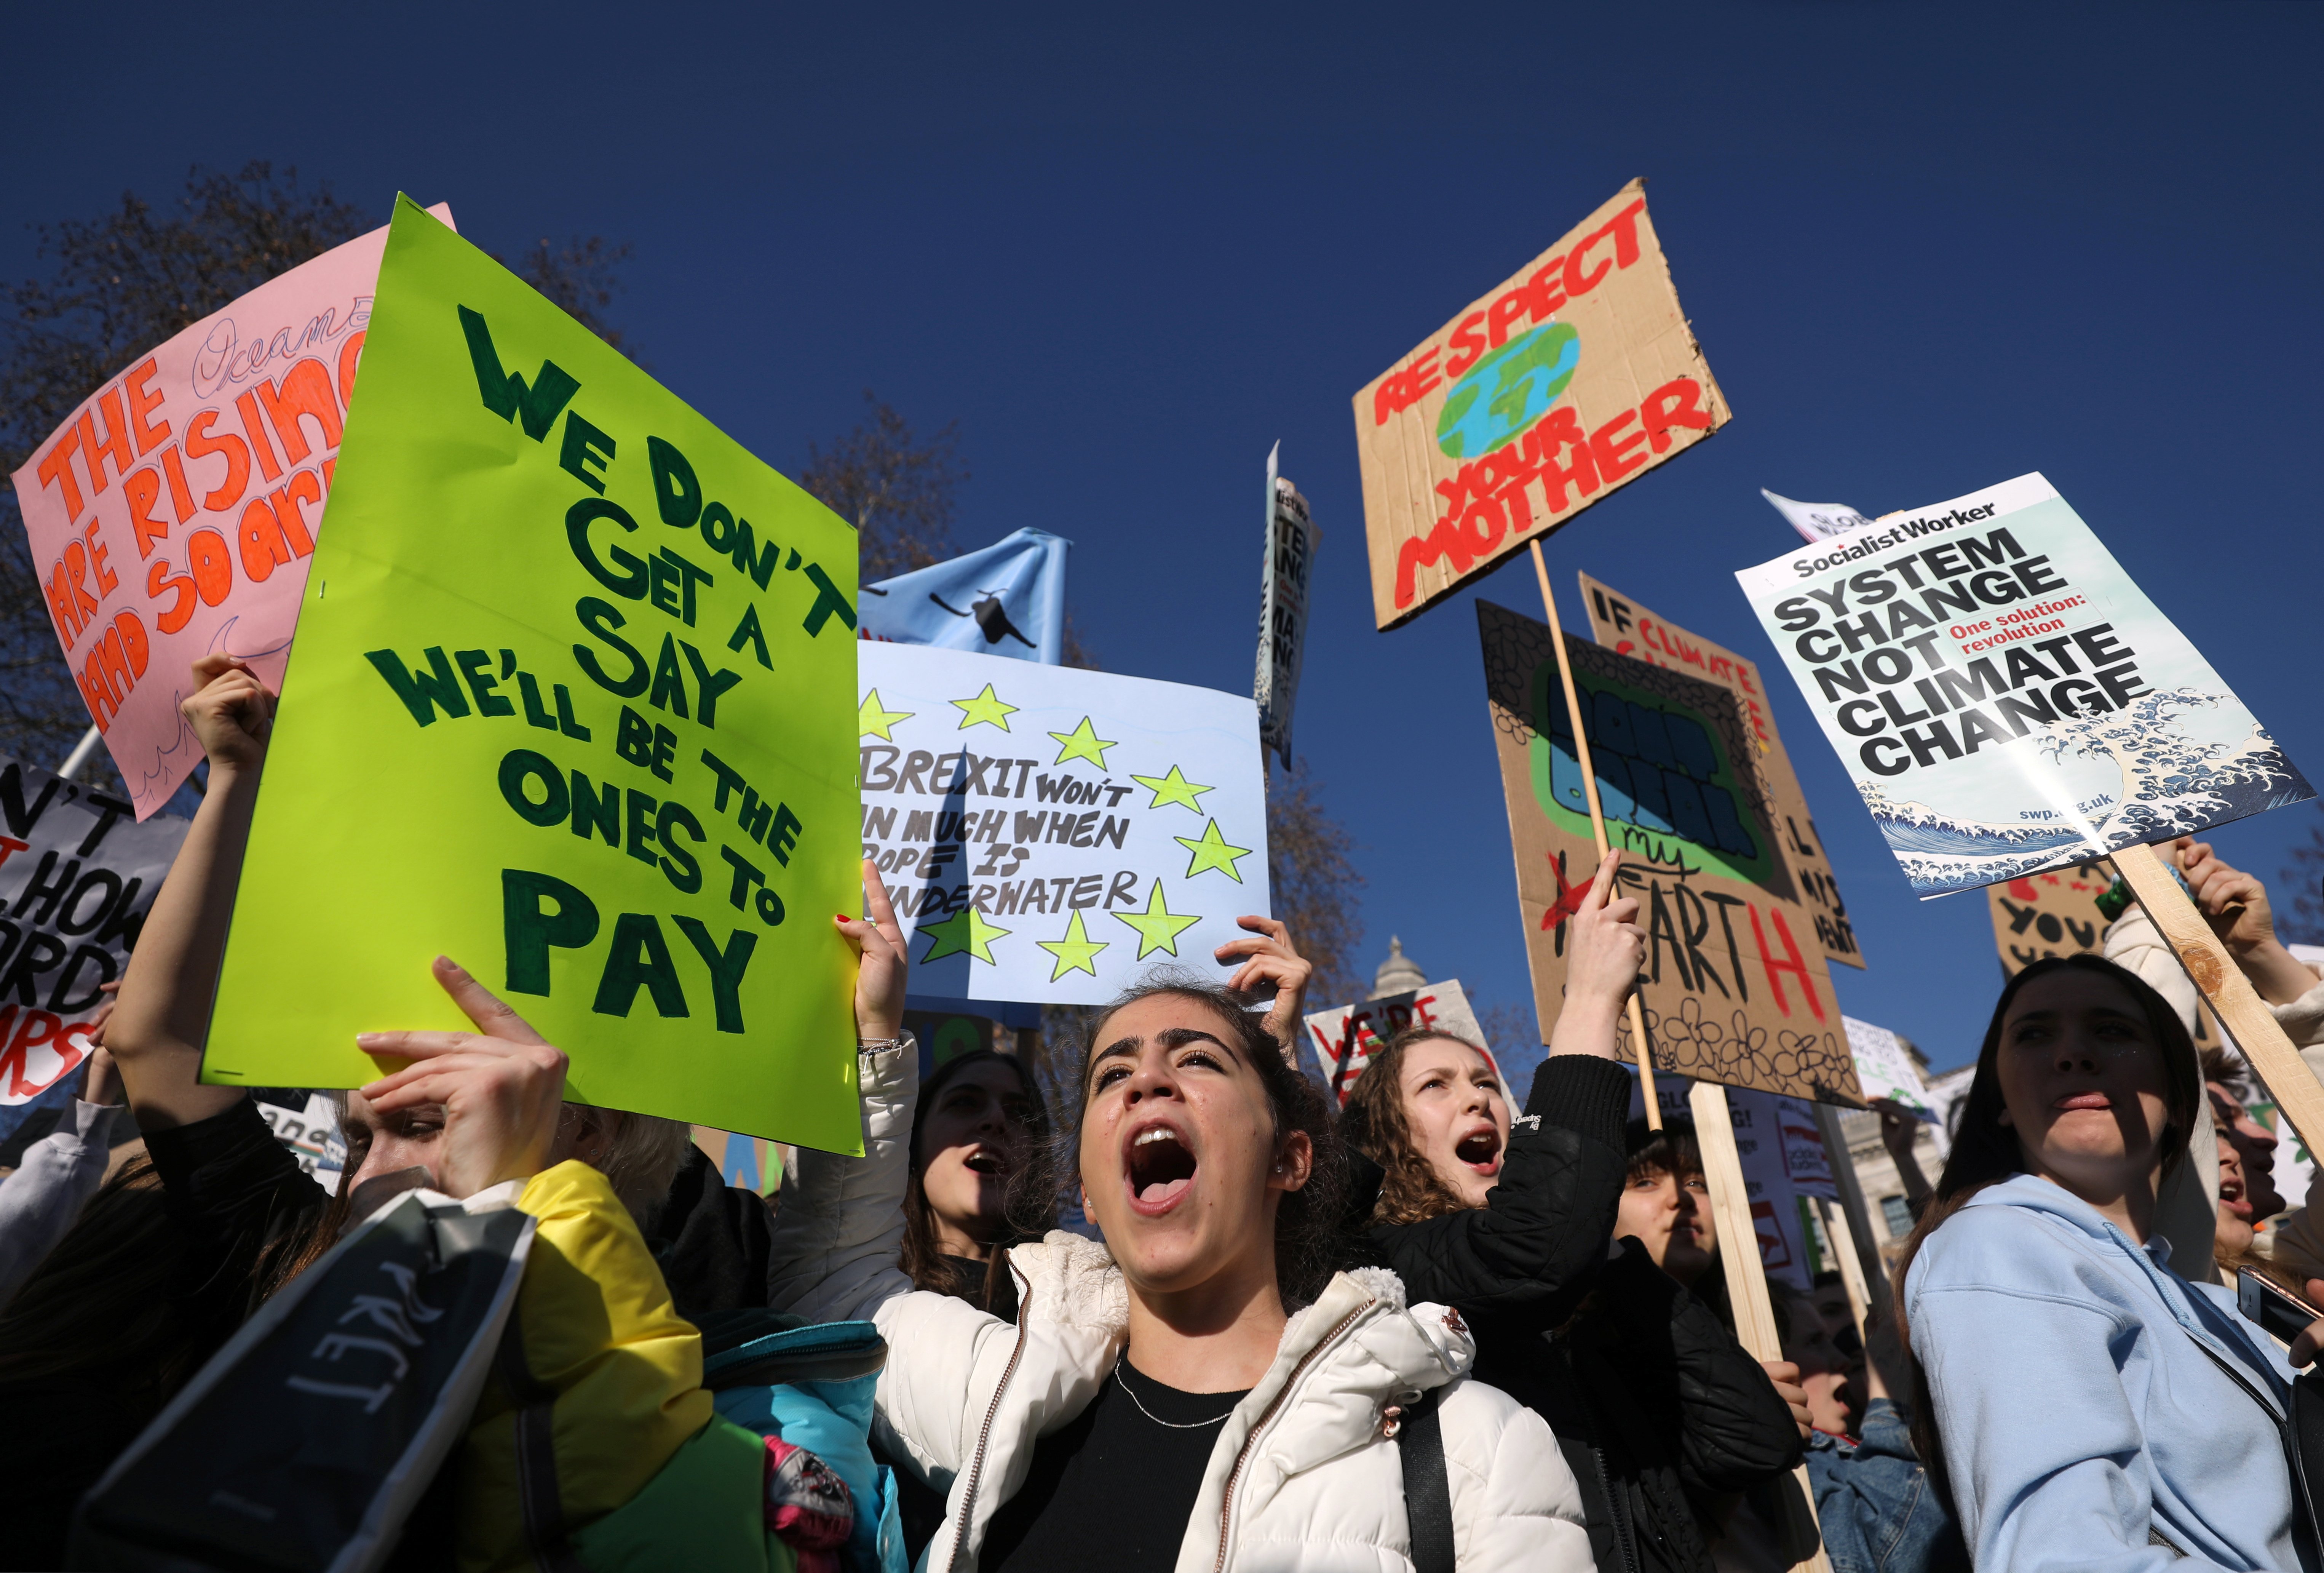 People take part in a "youth strike for climate change" demonstration in London